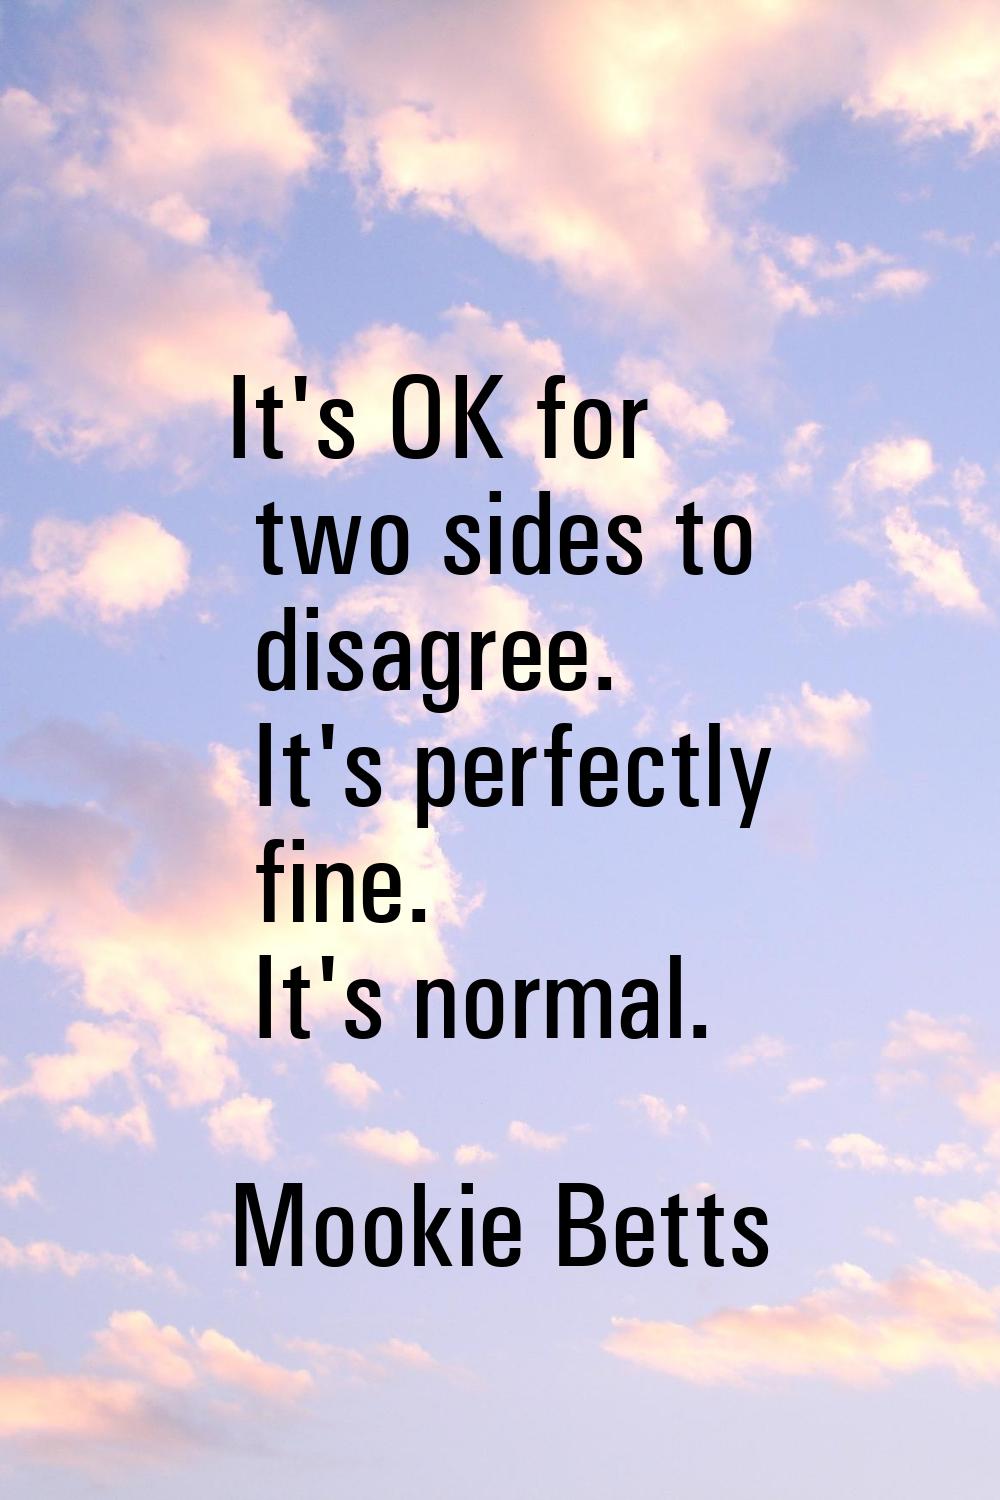 It's OK for two sides to disagree. It's perfectly fine. It's normal.